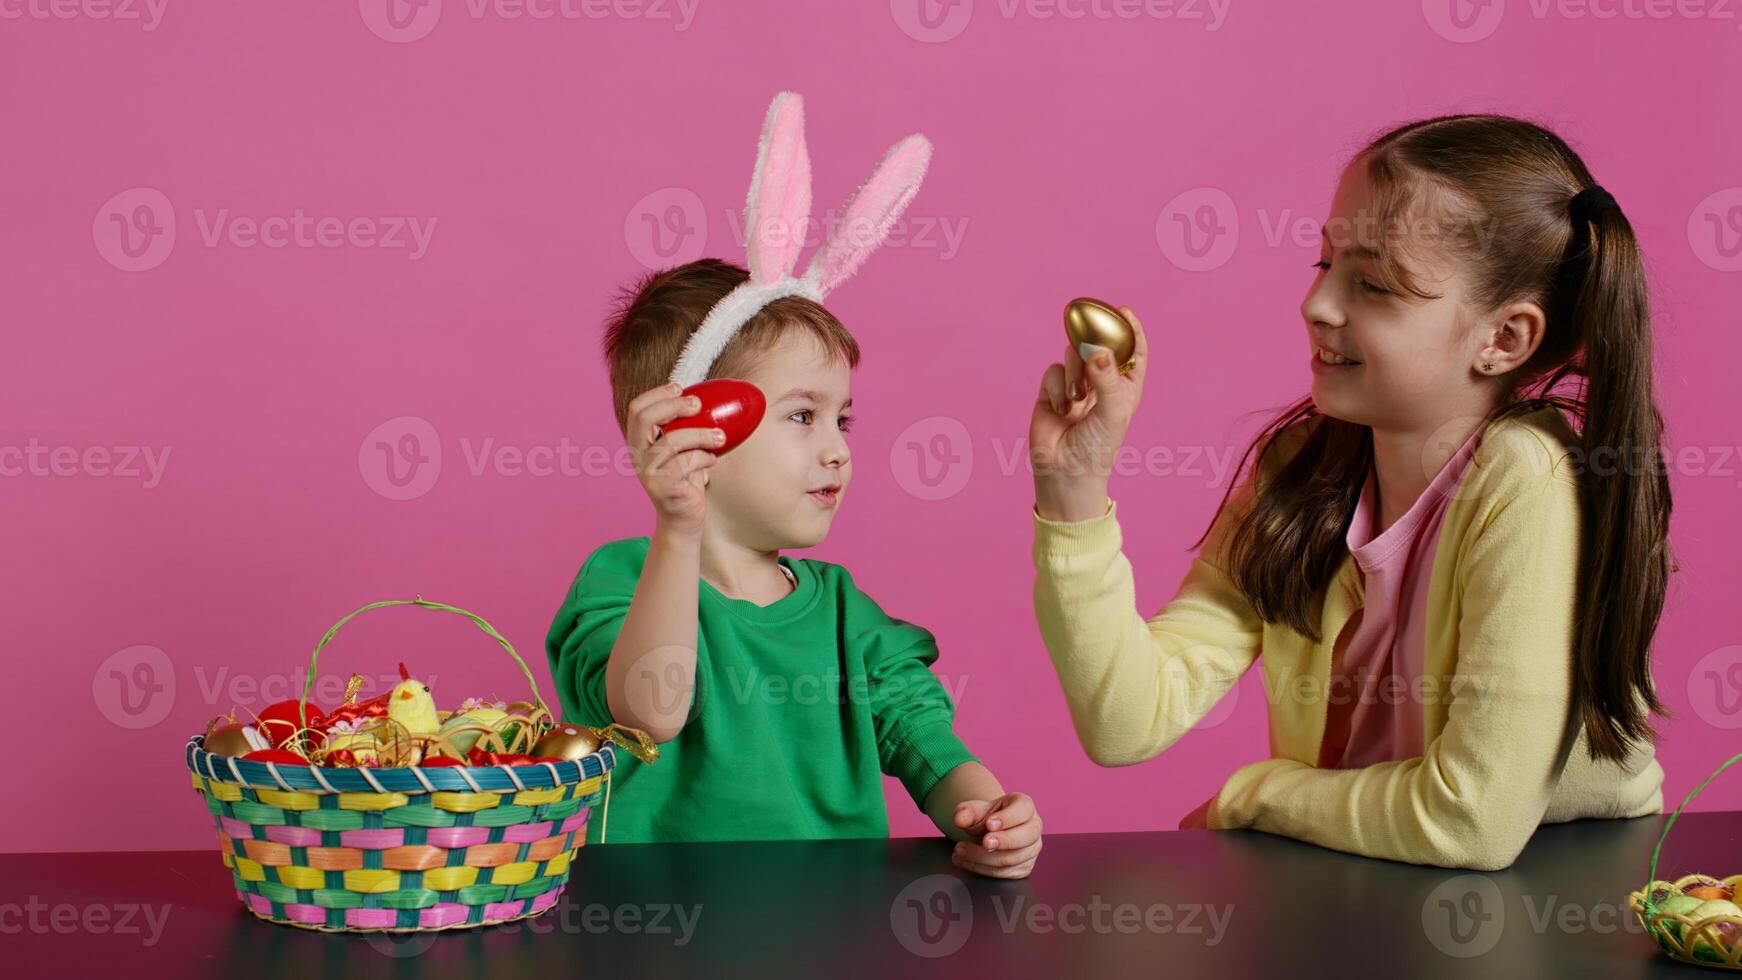 Sweet children knocking eggs together for easter tradition in studio, playing a seasonal holiday game against pink background. Lovely adorable kids having fun with festive decorations. Camera B. photo